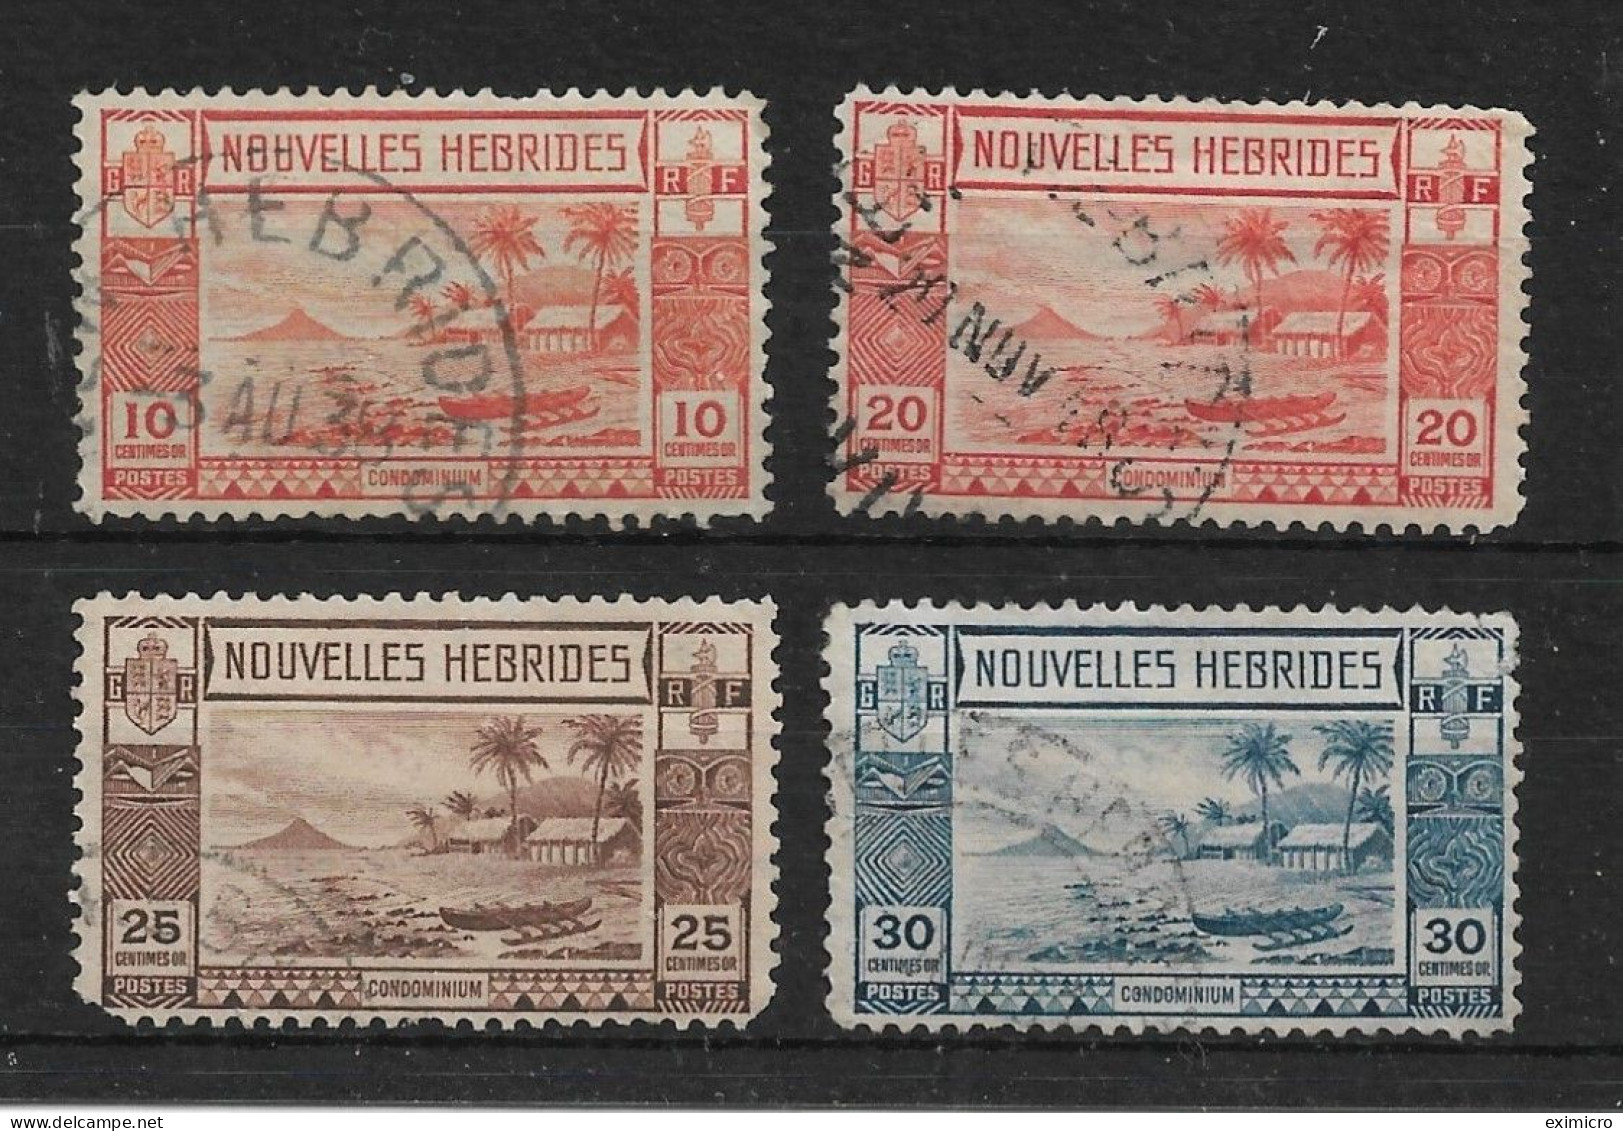 NEW HEBRIDES (FRENCH CURRENCY) 1938 10c, 20c, 25c, 30c SG F54, F56, F57, F58 FINE USED Cat £26 - Oblitérés